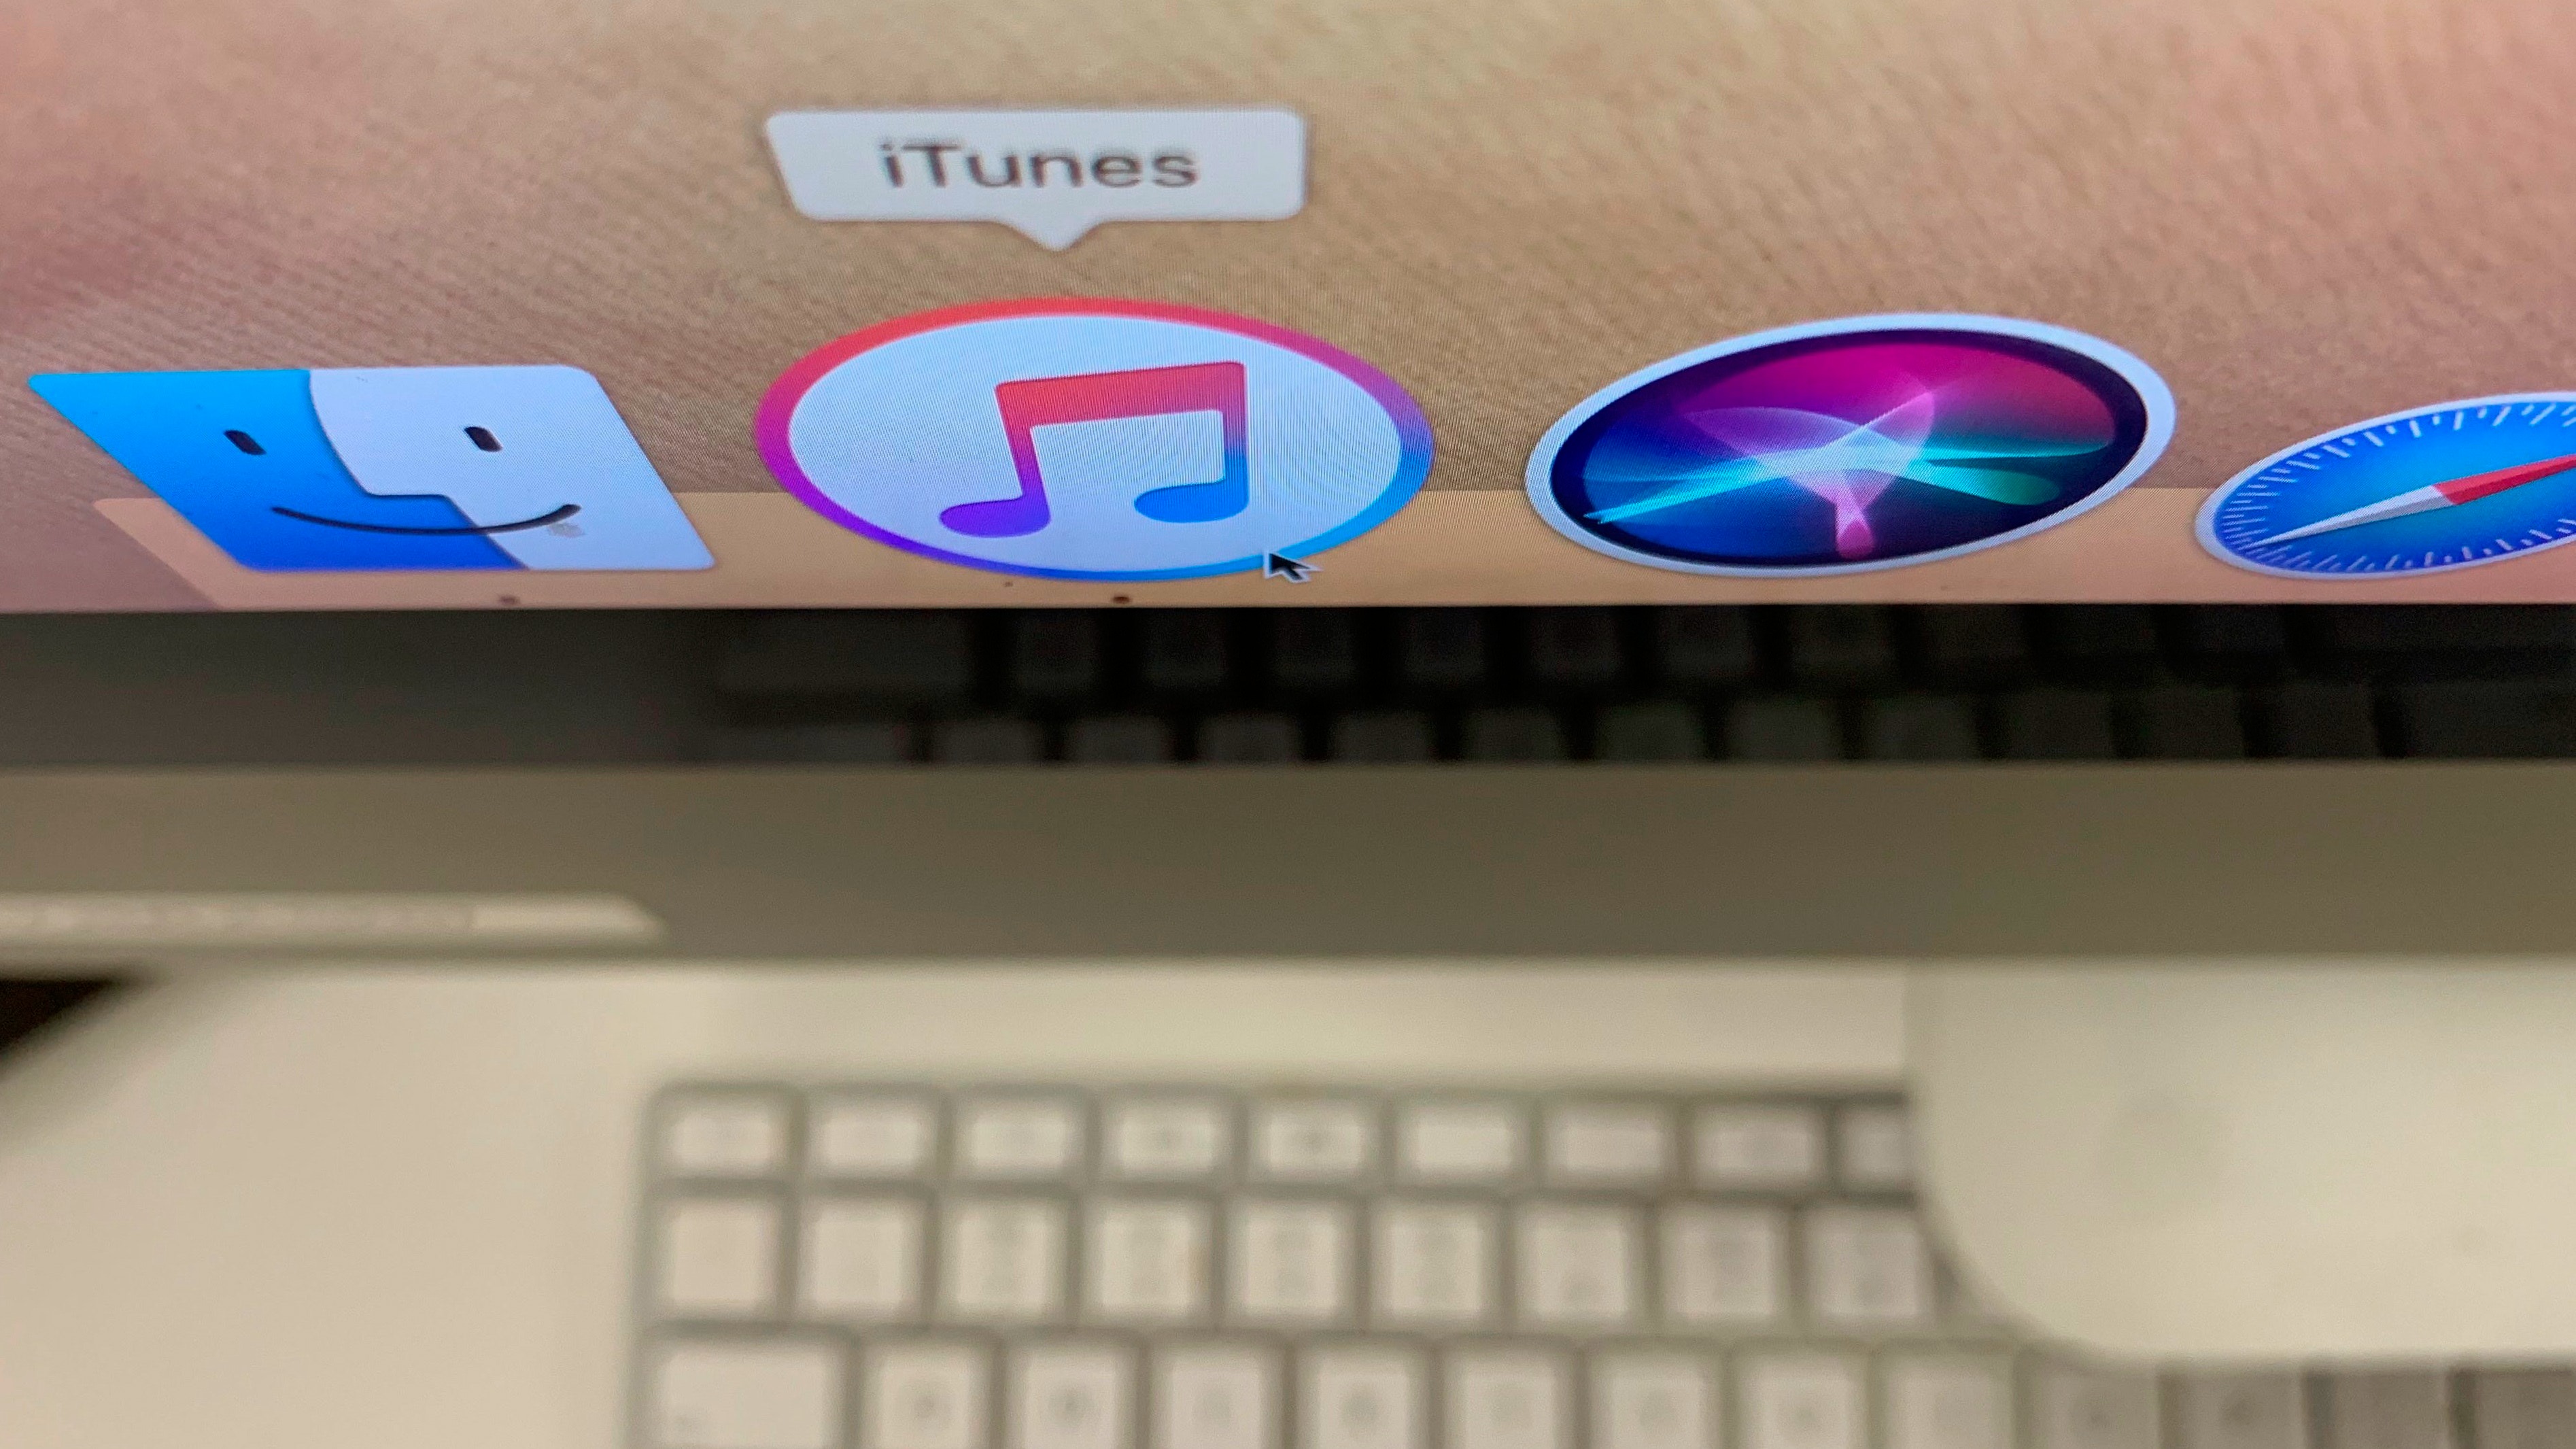 Can You Install iTunes On A Mac?